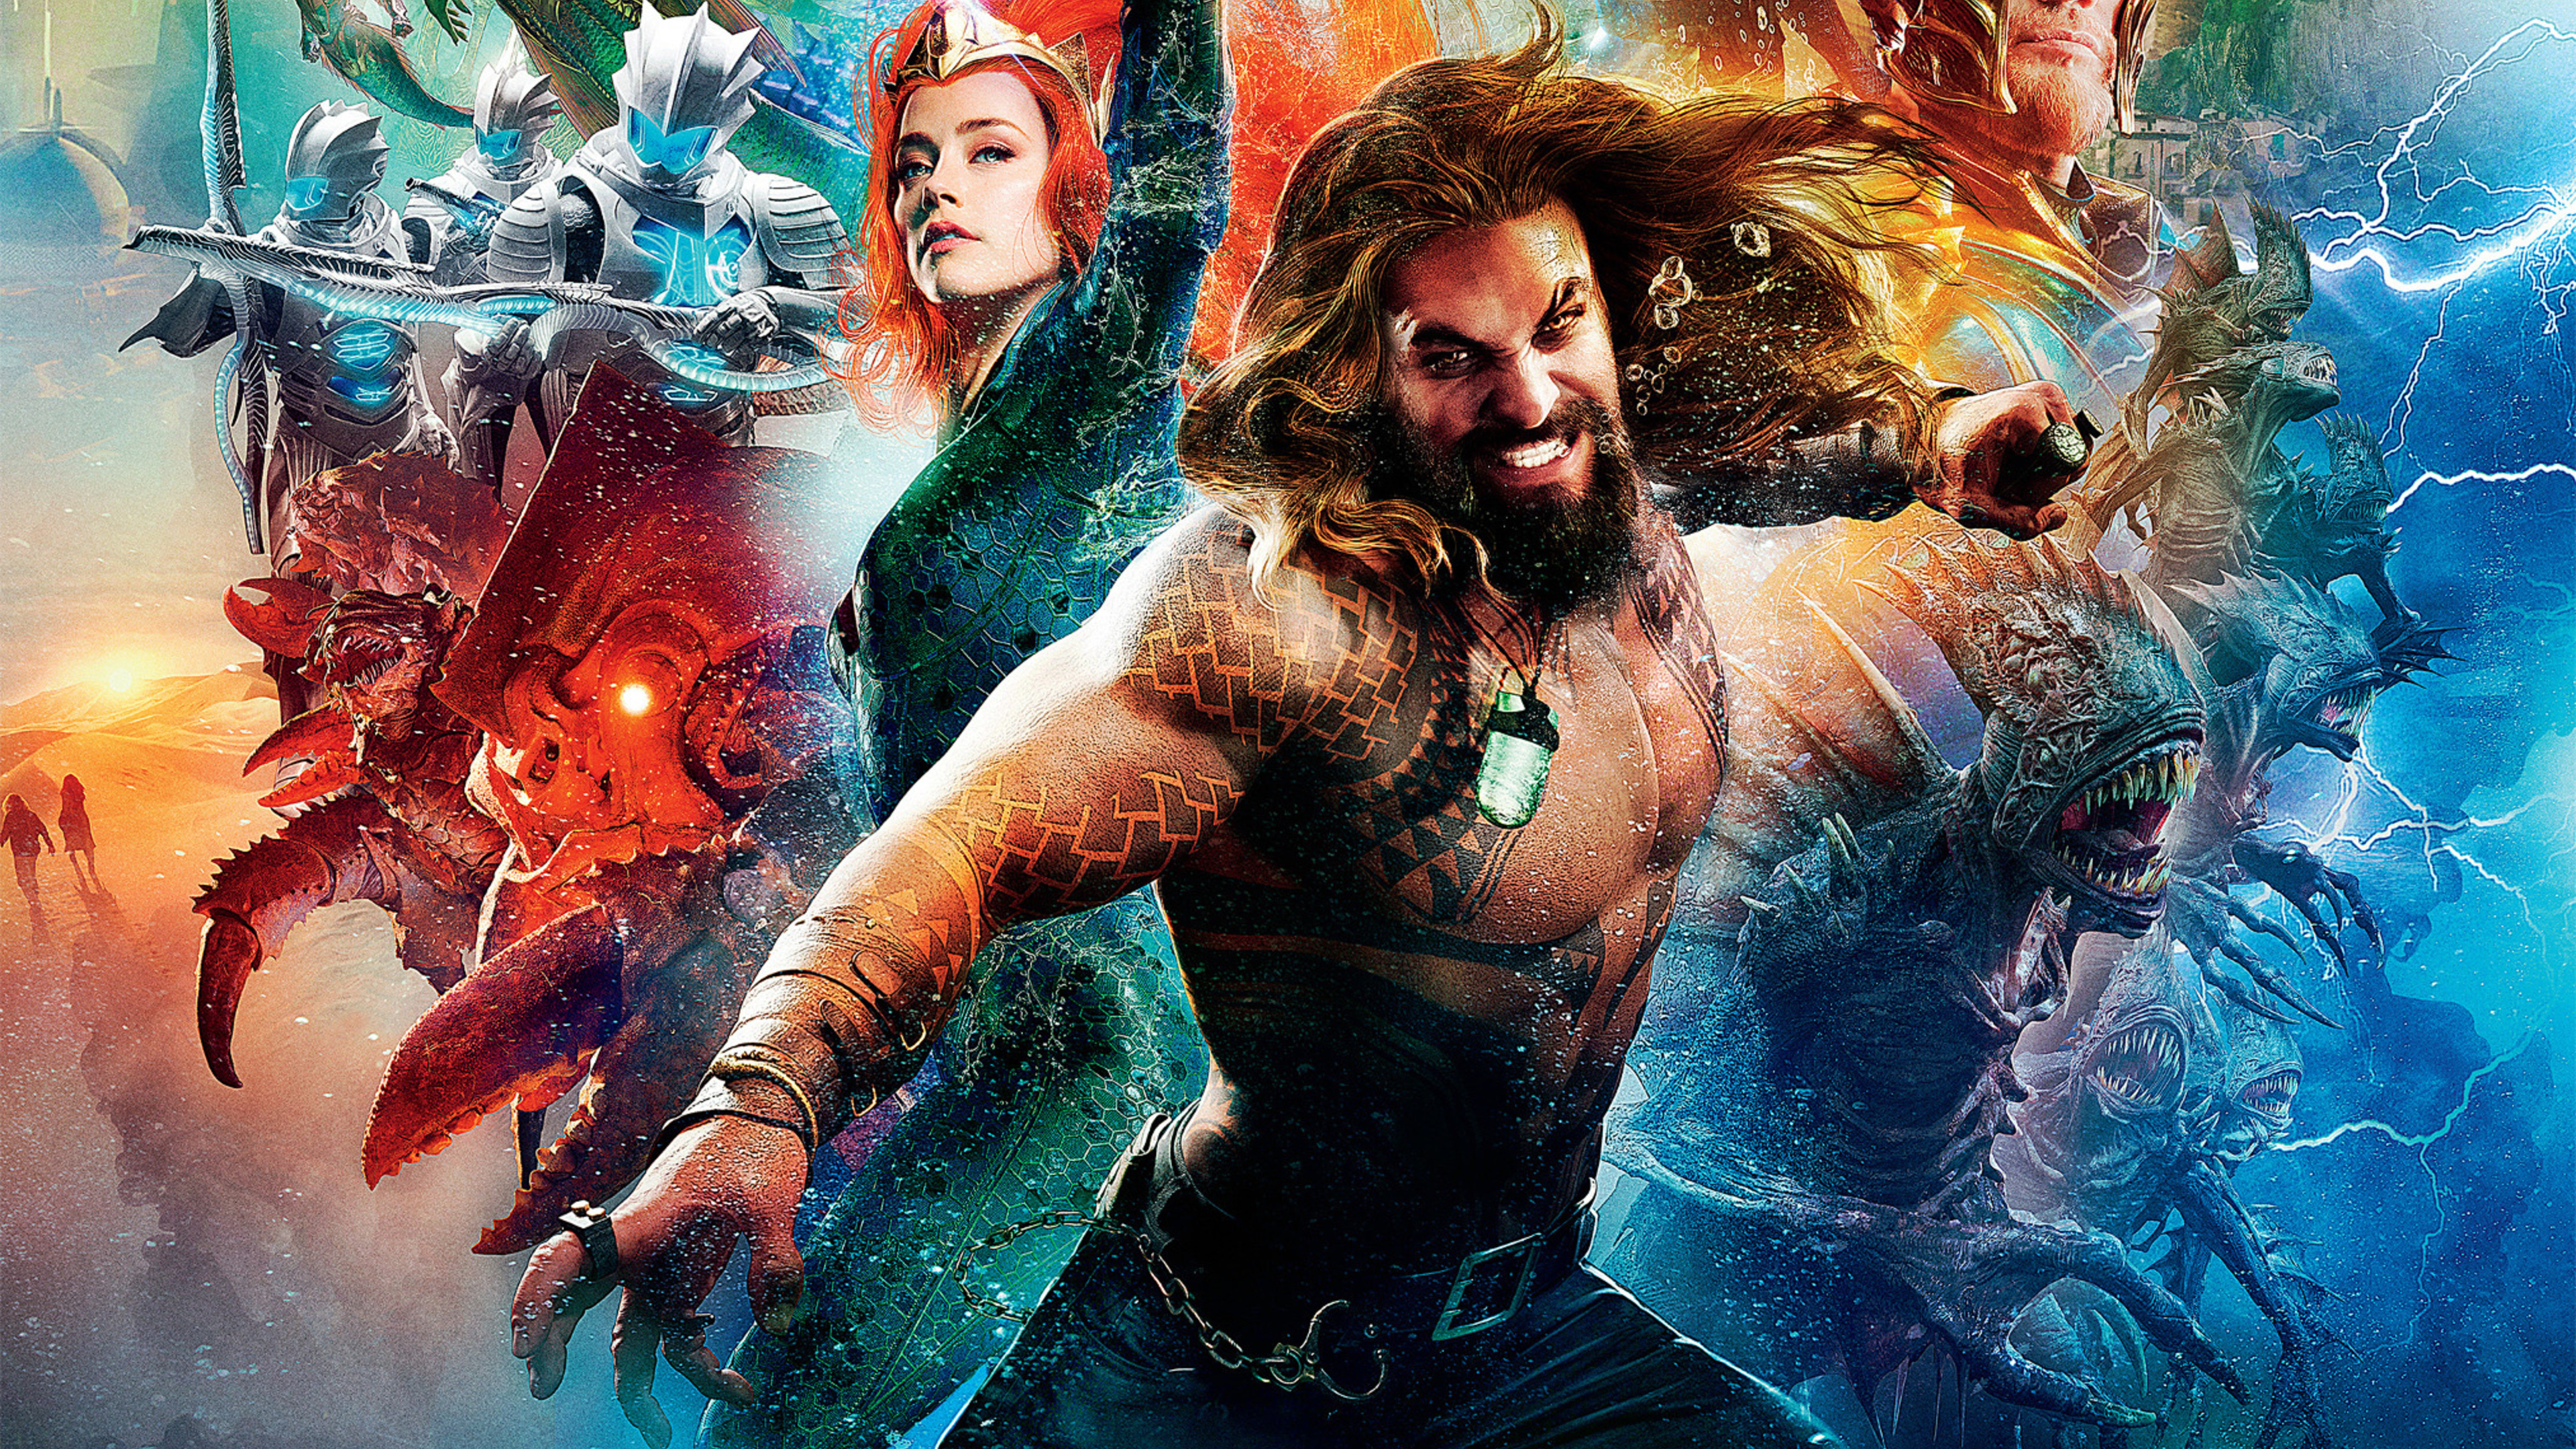 download the new for android Aquaman